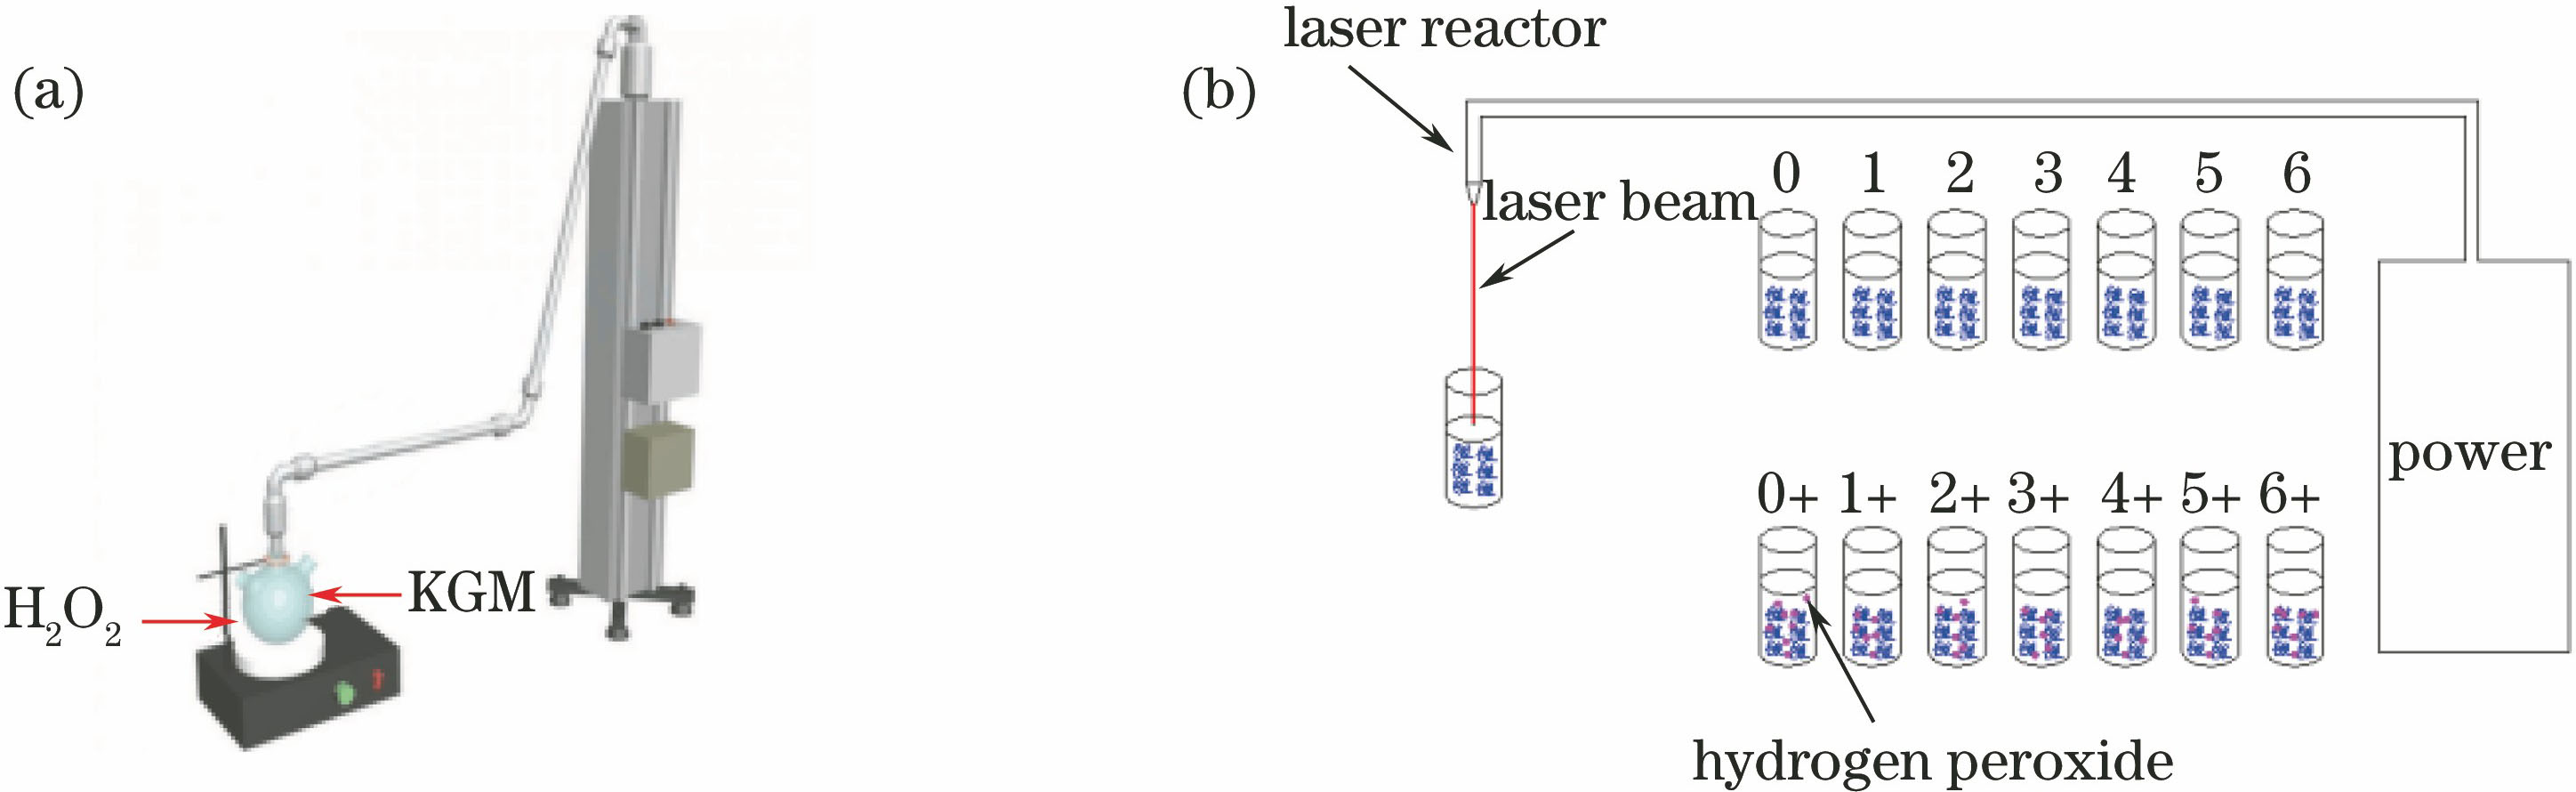 Schematics of laser processing. (a) Diagram of equipment operating; (b) diagram of sample processing